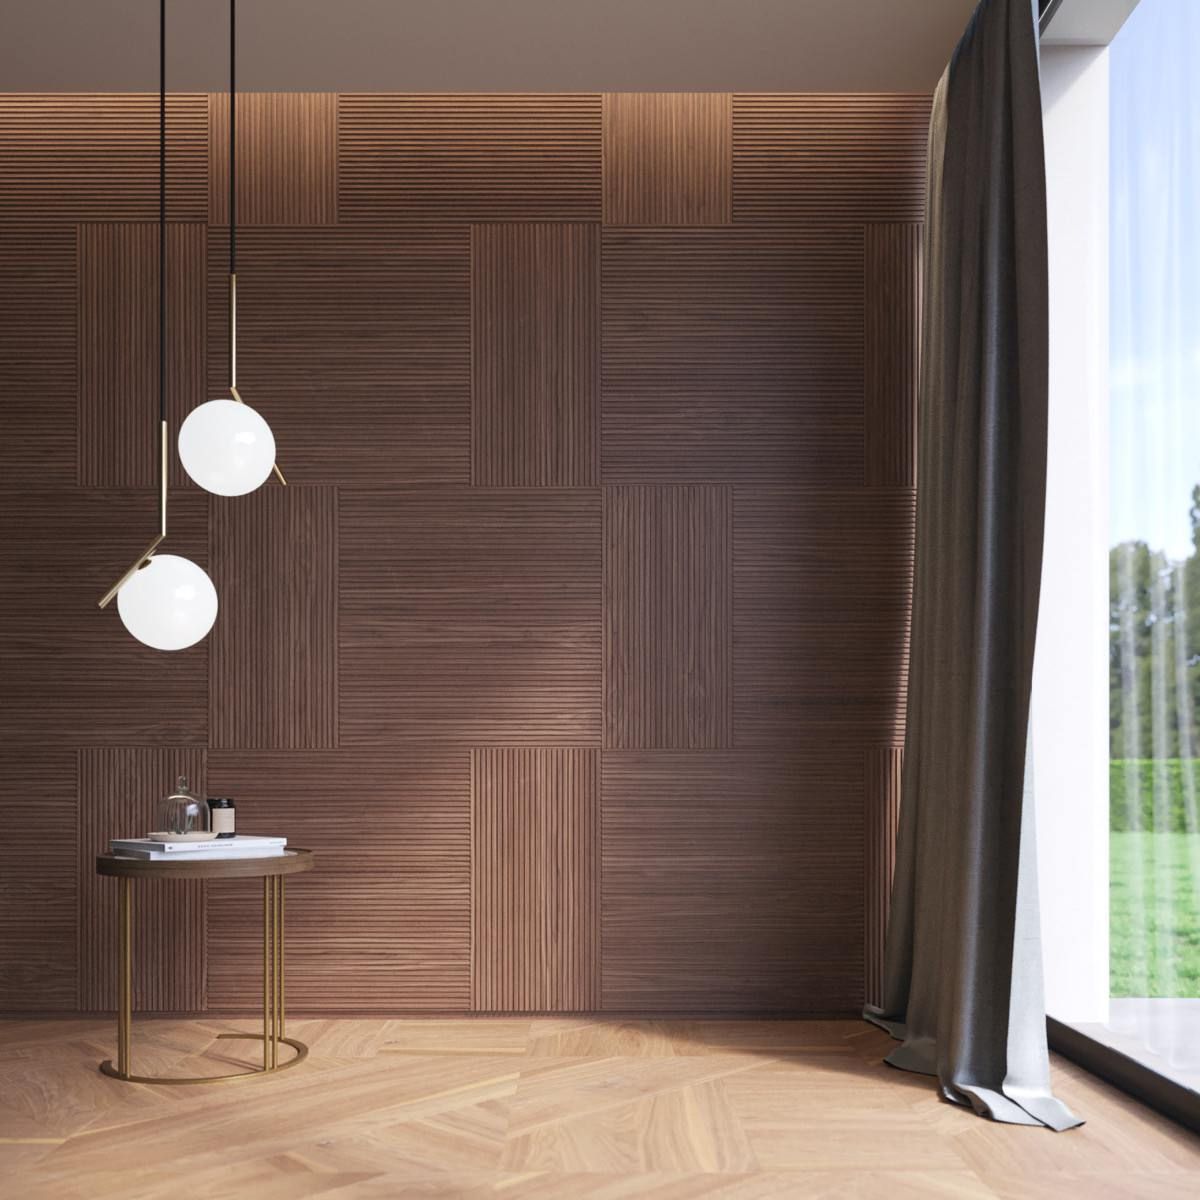 3D Code module with horizontal and vertical lines - Wood Interiors